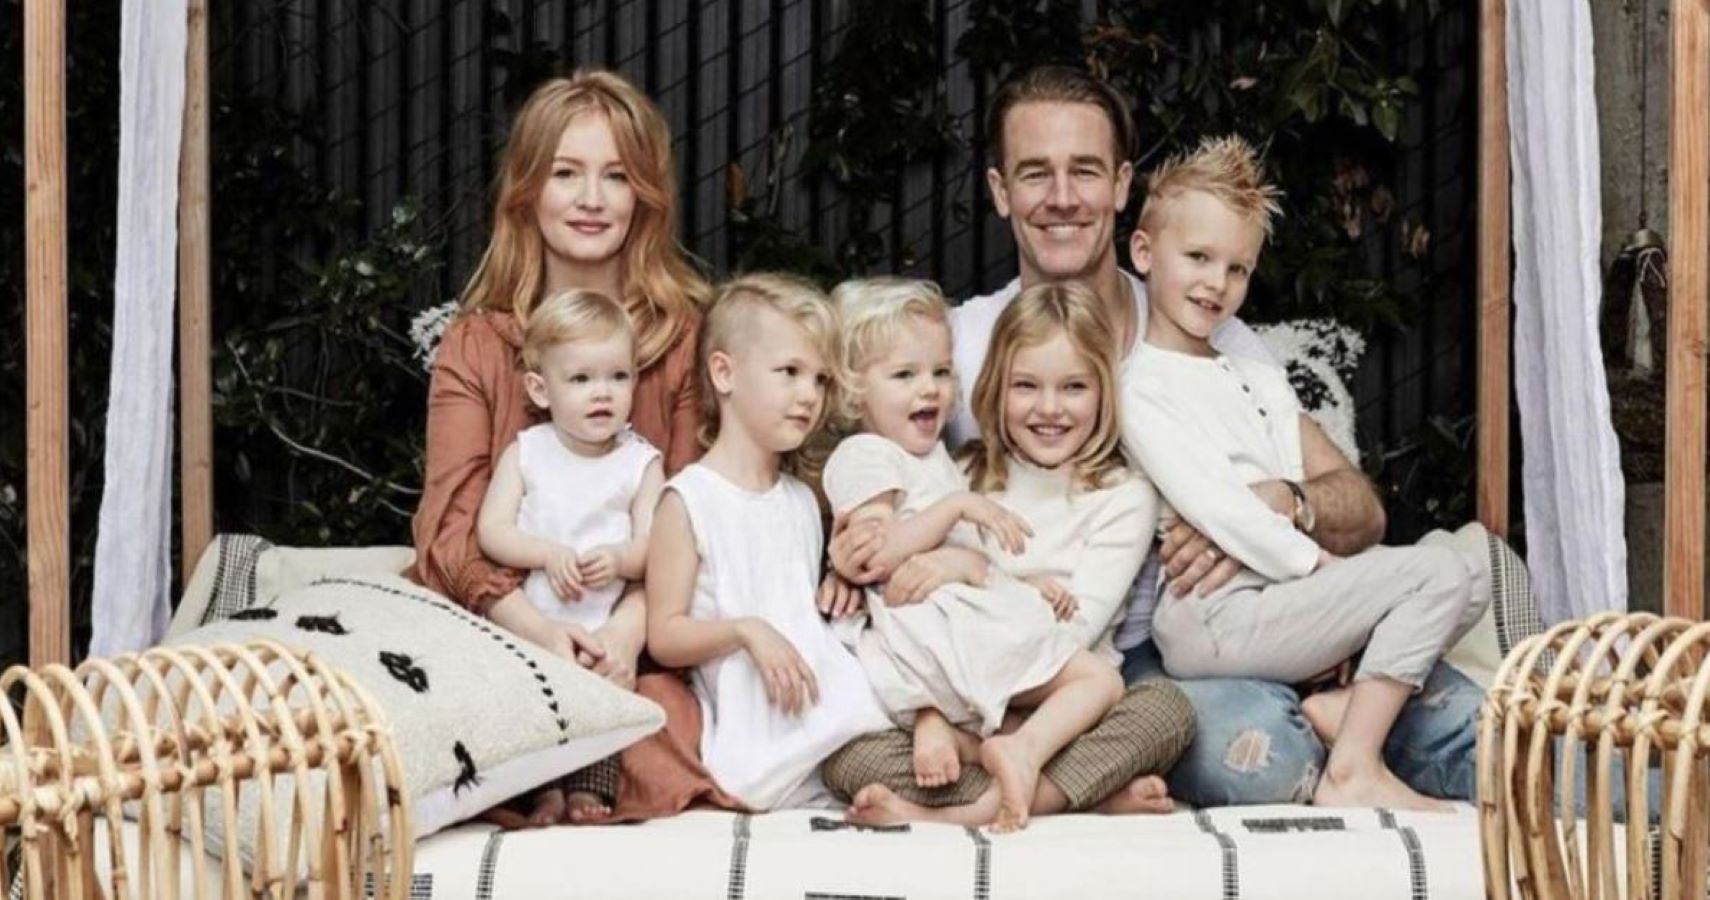 James Van Der Beek and wife Kimberly share importance of blood donation year after miscarriage